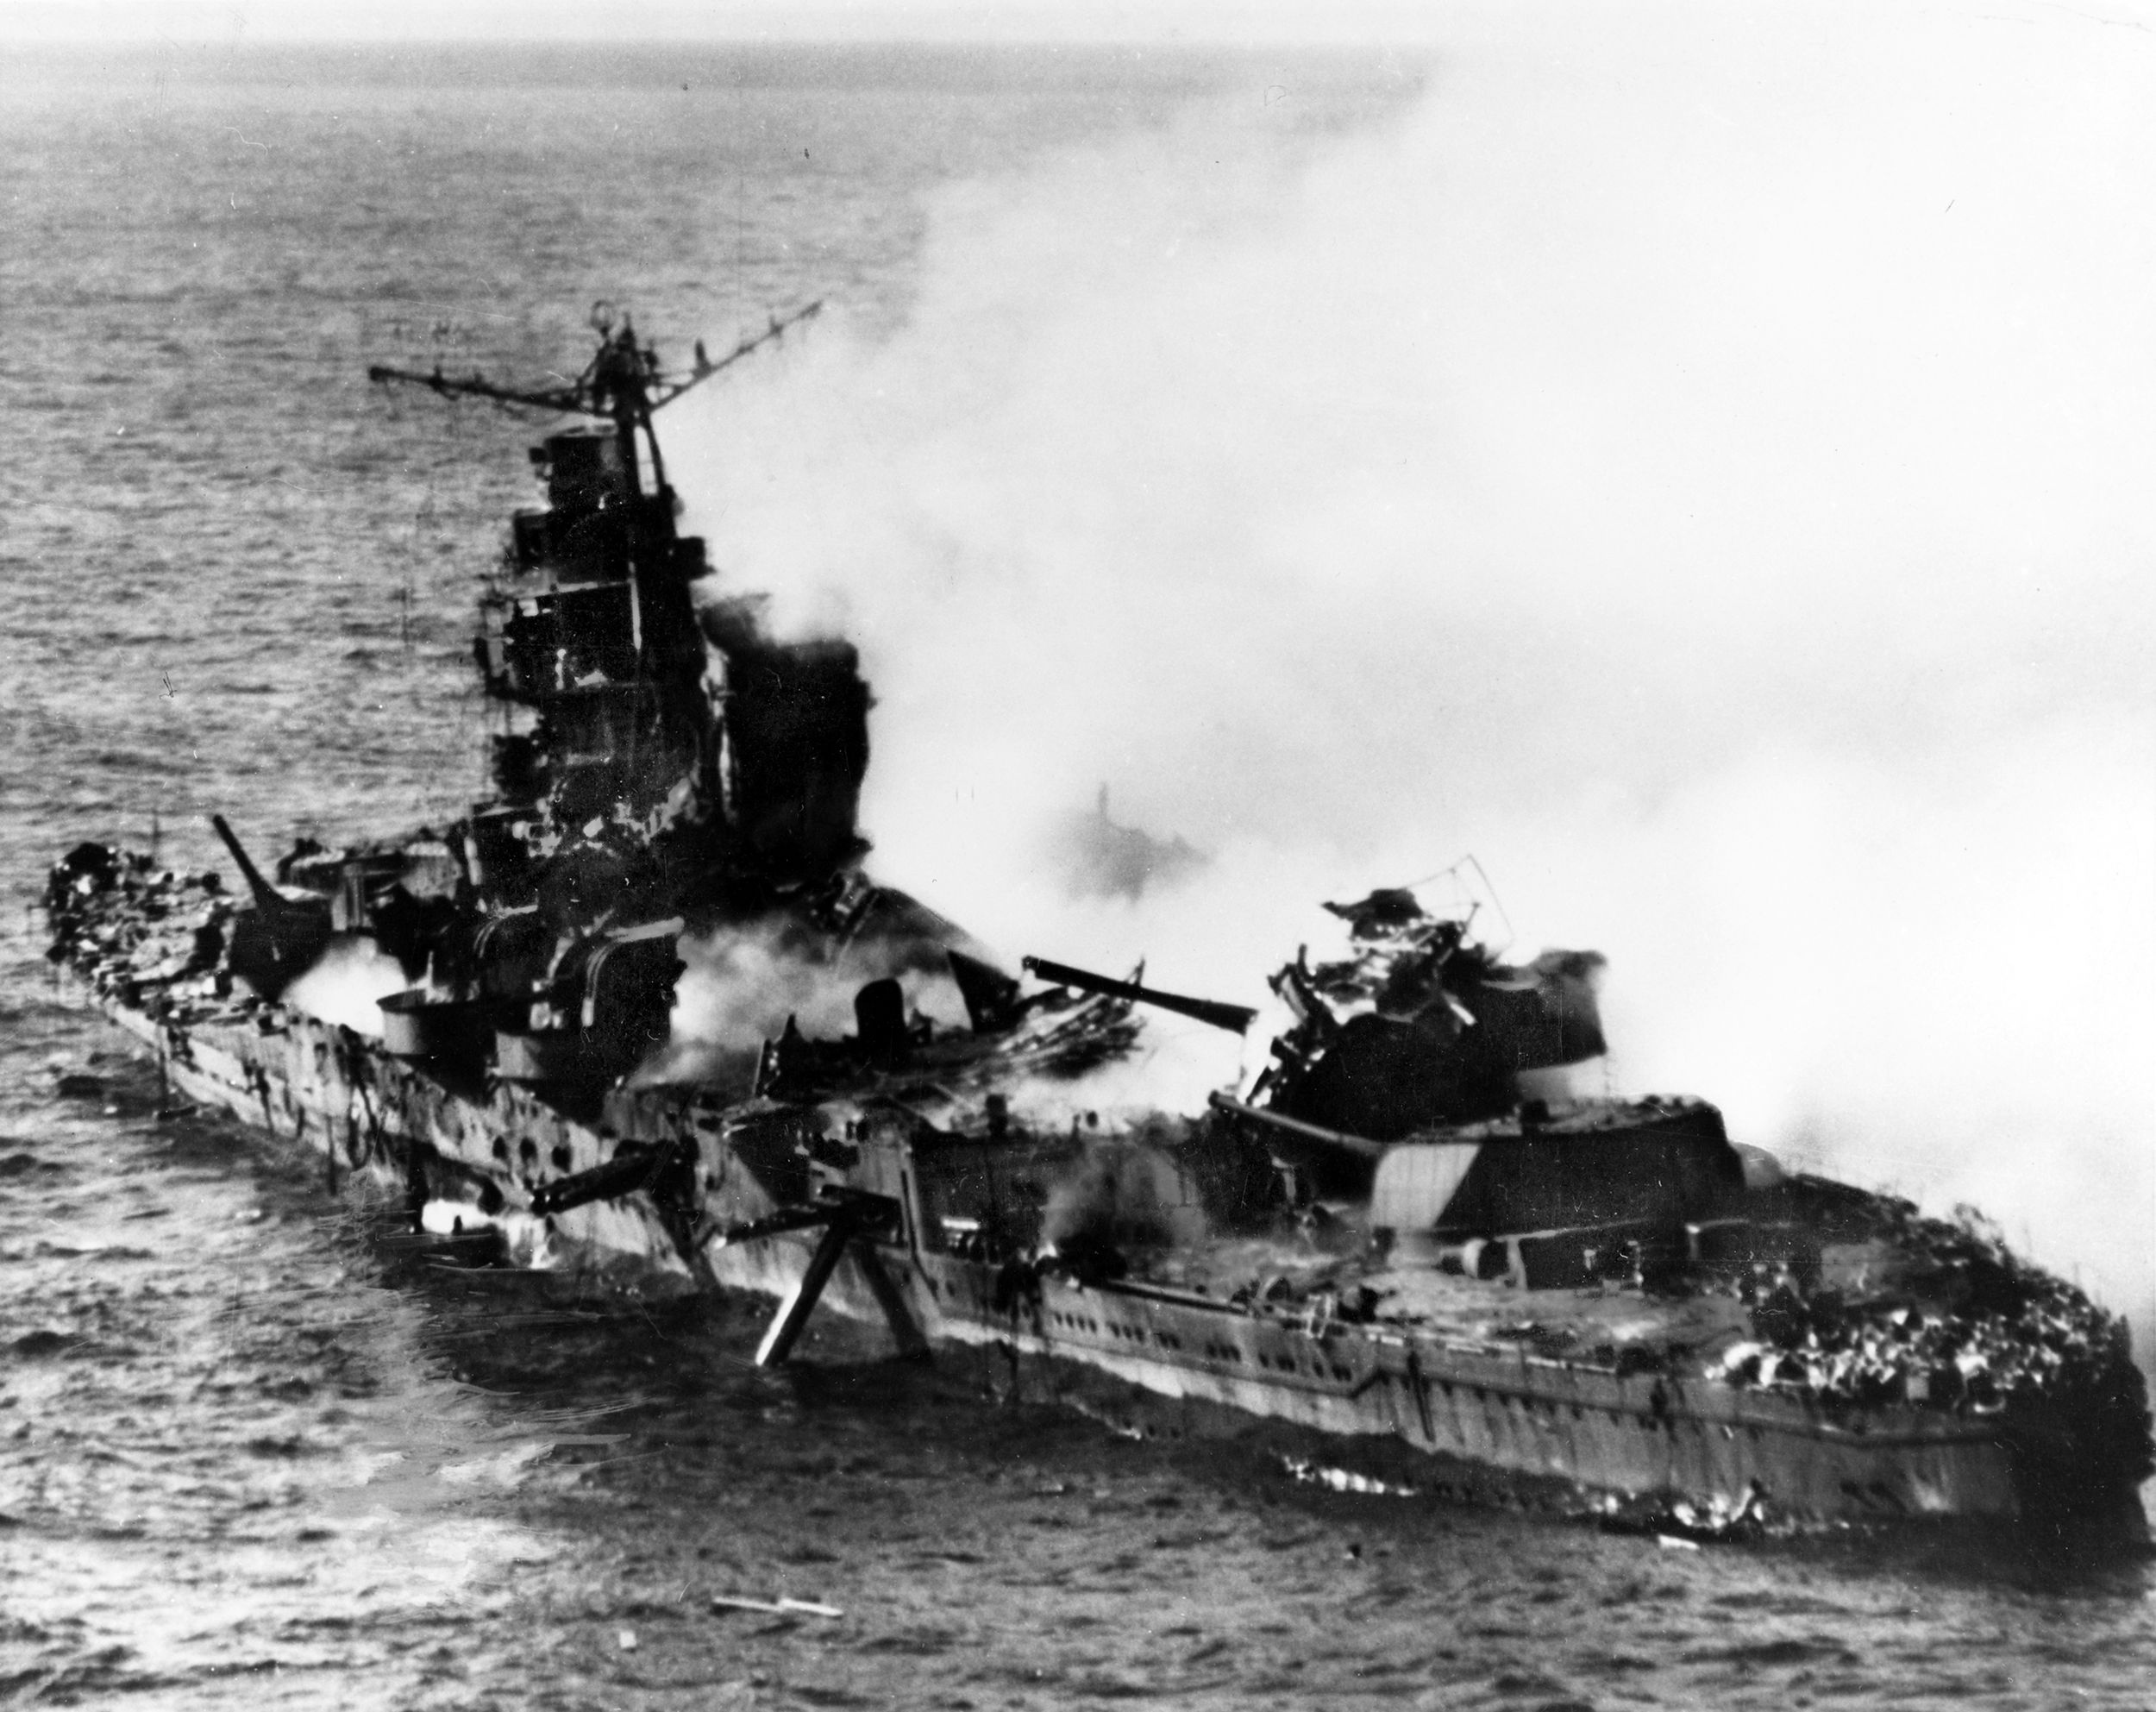 The Japanese heavy cruiser Mikuma is a smoking wreck following attacks by Douglas SBD Dauntless dive bombers from the aircraft carriers USS Enterprise and USS Hornet during the Battle of Midway on June 6, 1942. Note the torpedo dangling from the aft port side tubes and the wreckage atop her No. 4 eight-inch gun turret. This photograph was taken from a Dauntless dive bomber flying from the Enterprise.